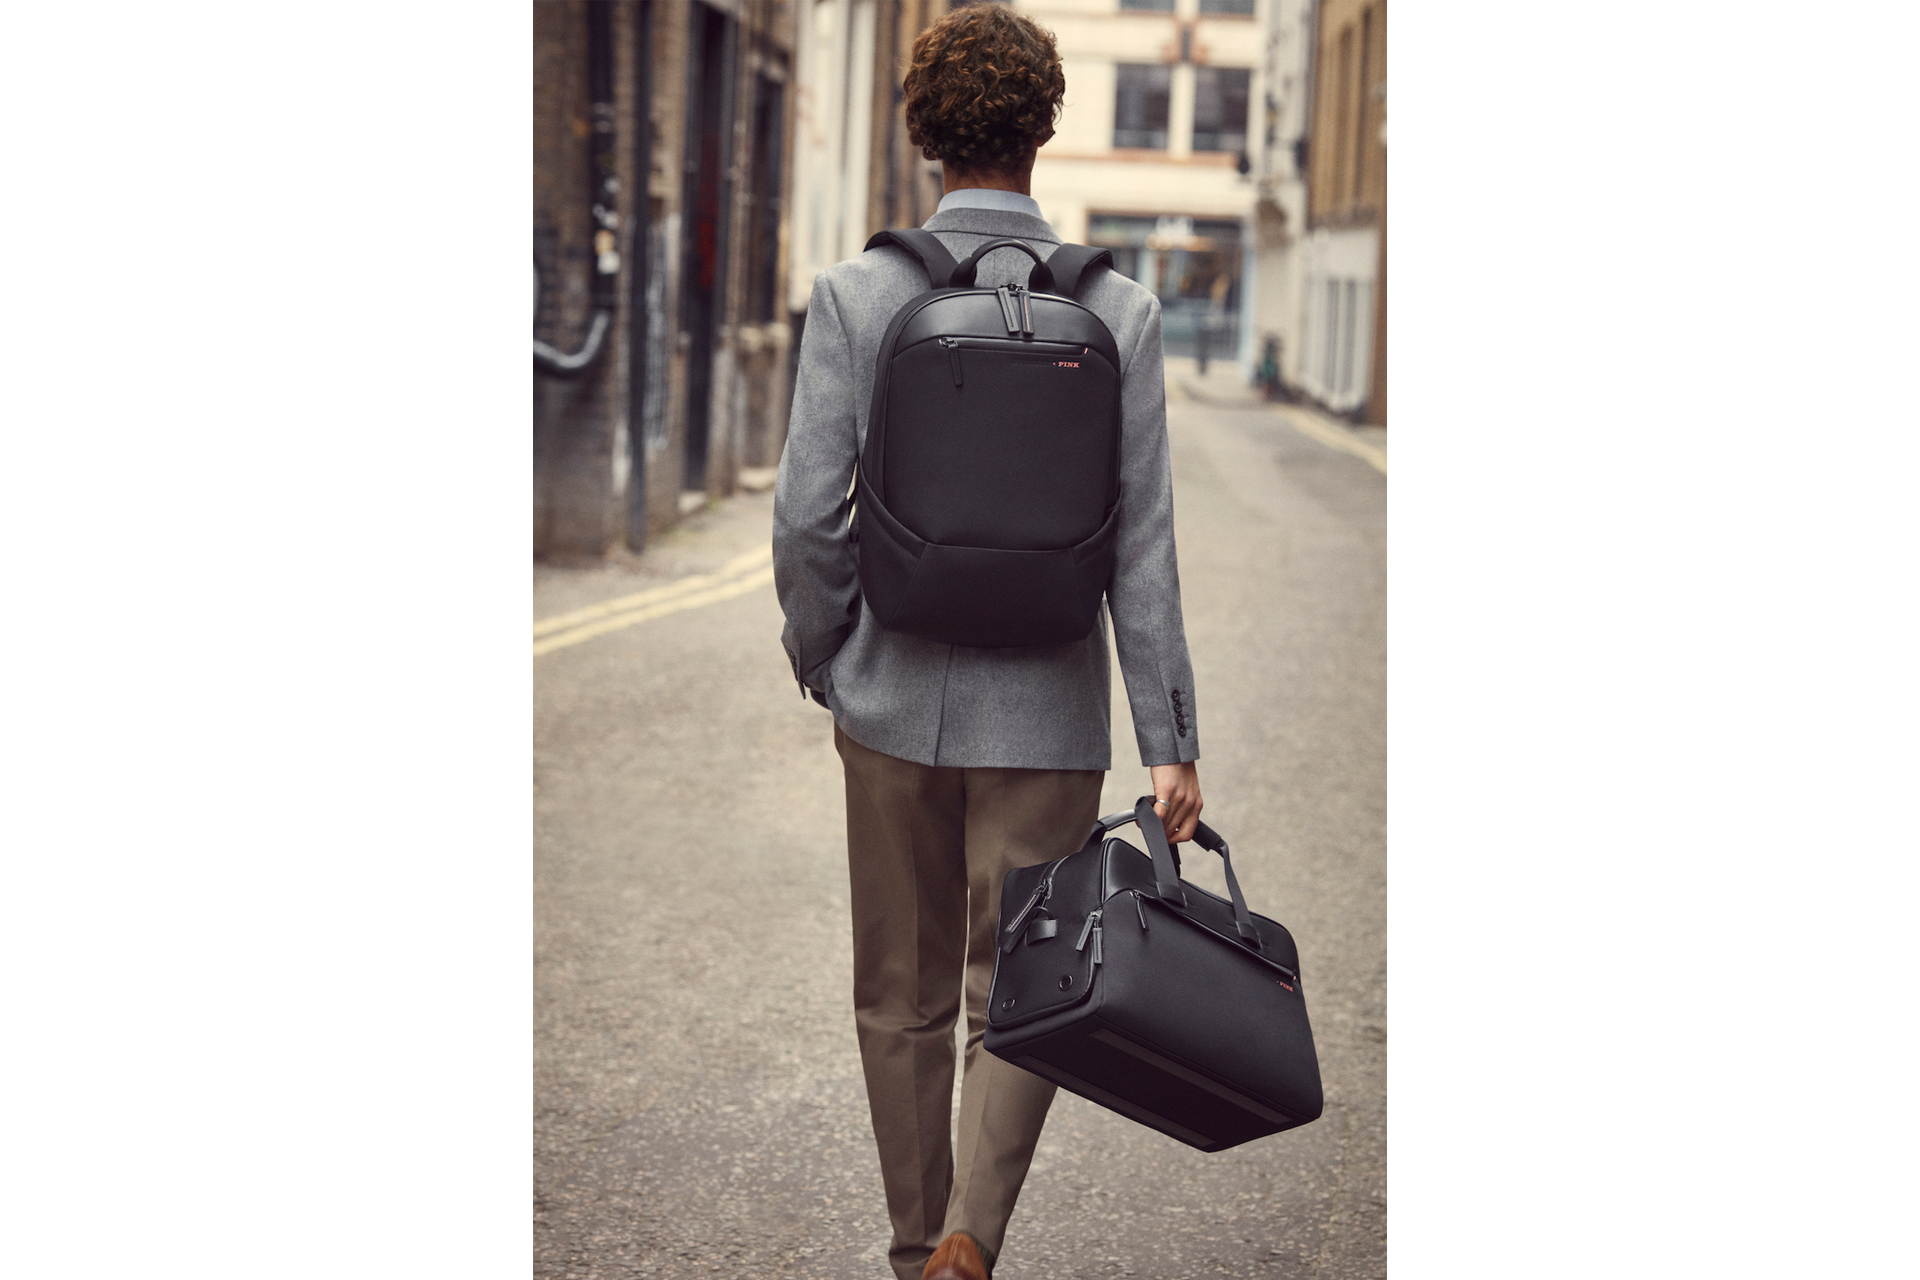 Man carrying rucksack and holdall